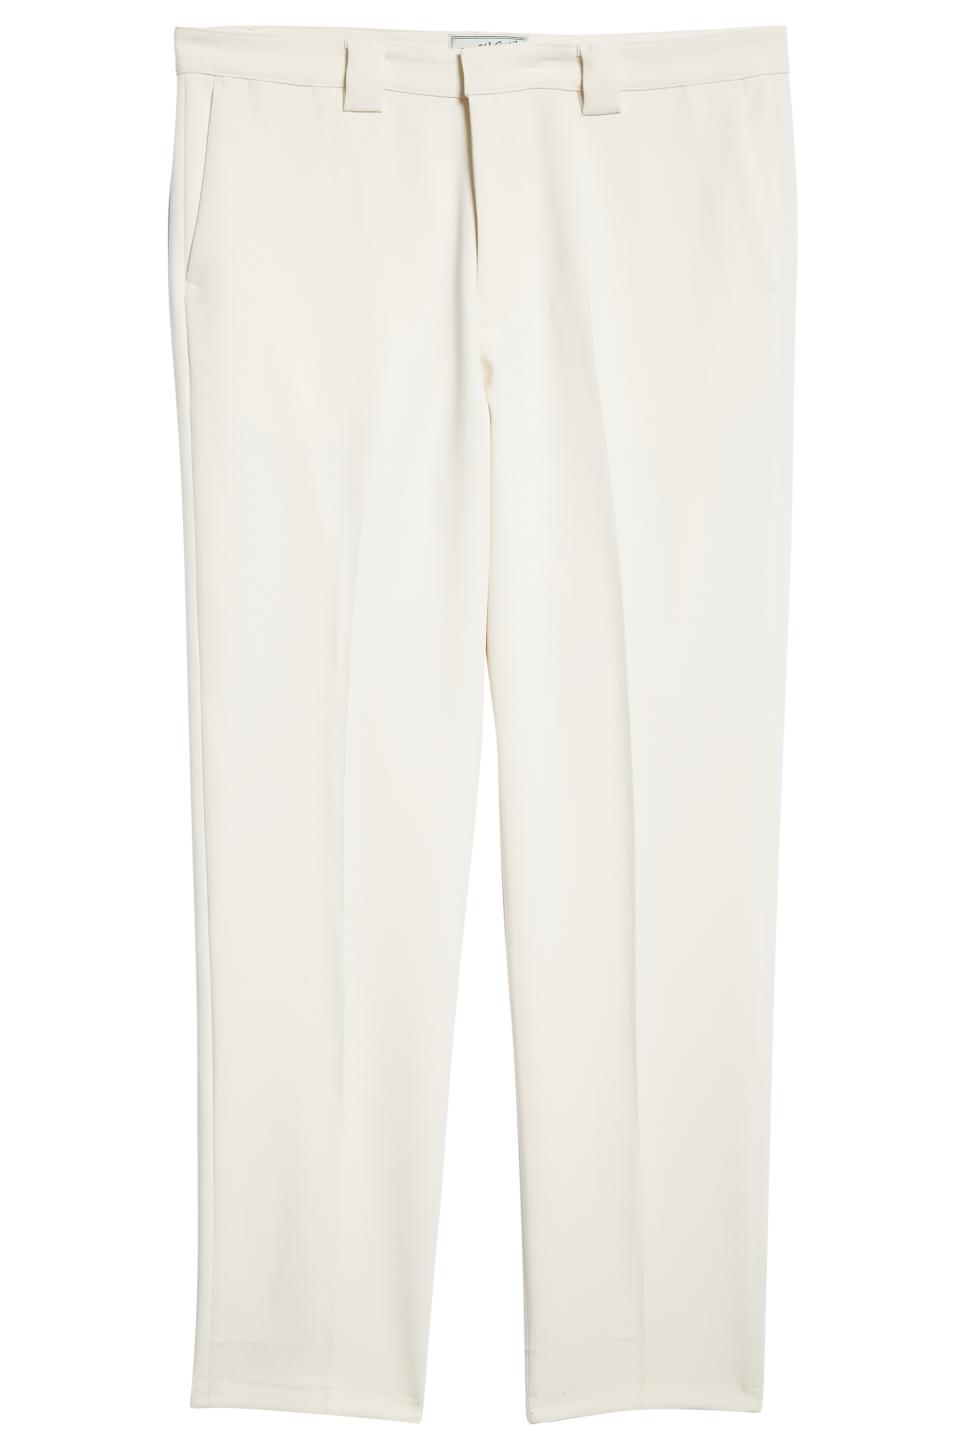 Bogey Boys The Solid Flat Front Golf Pants